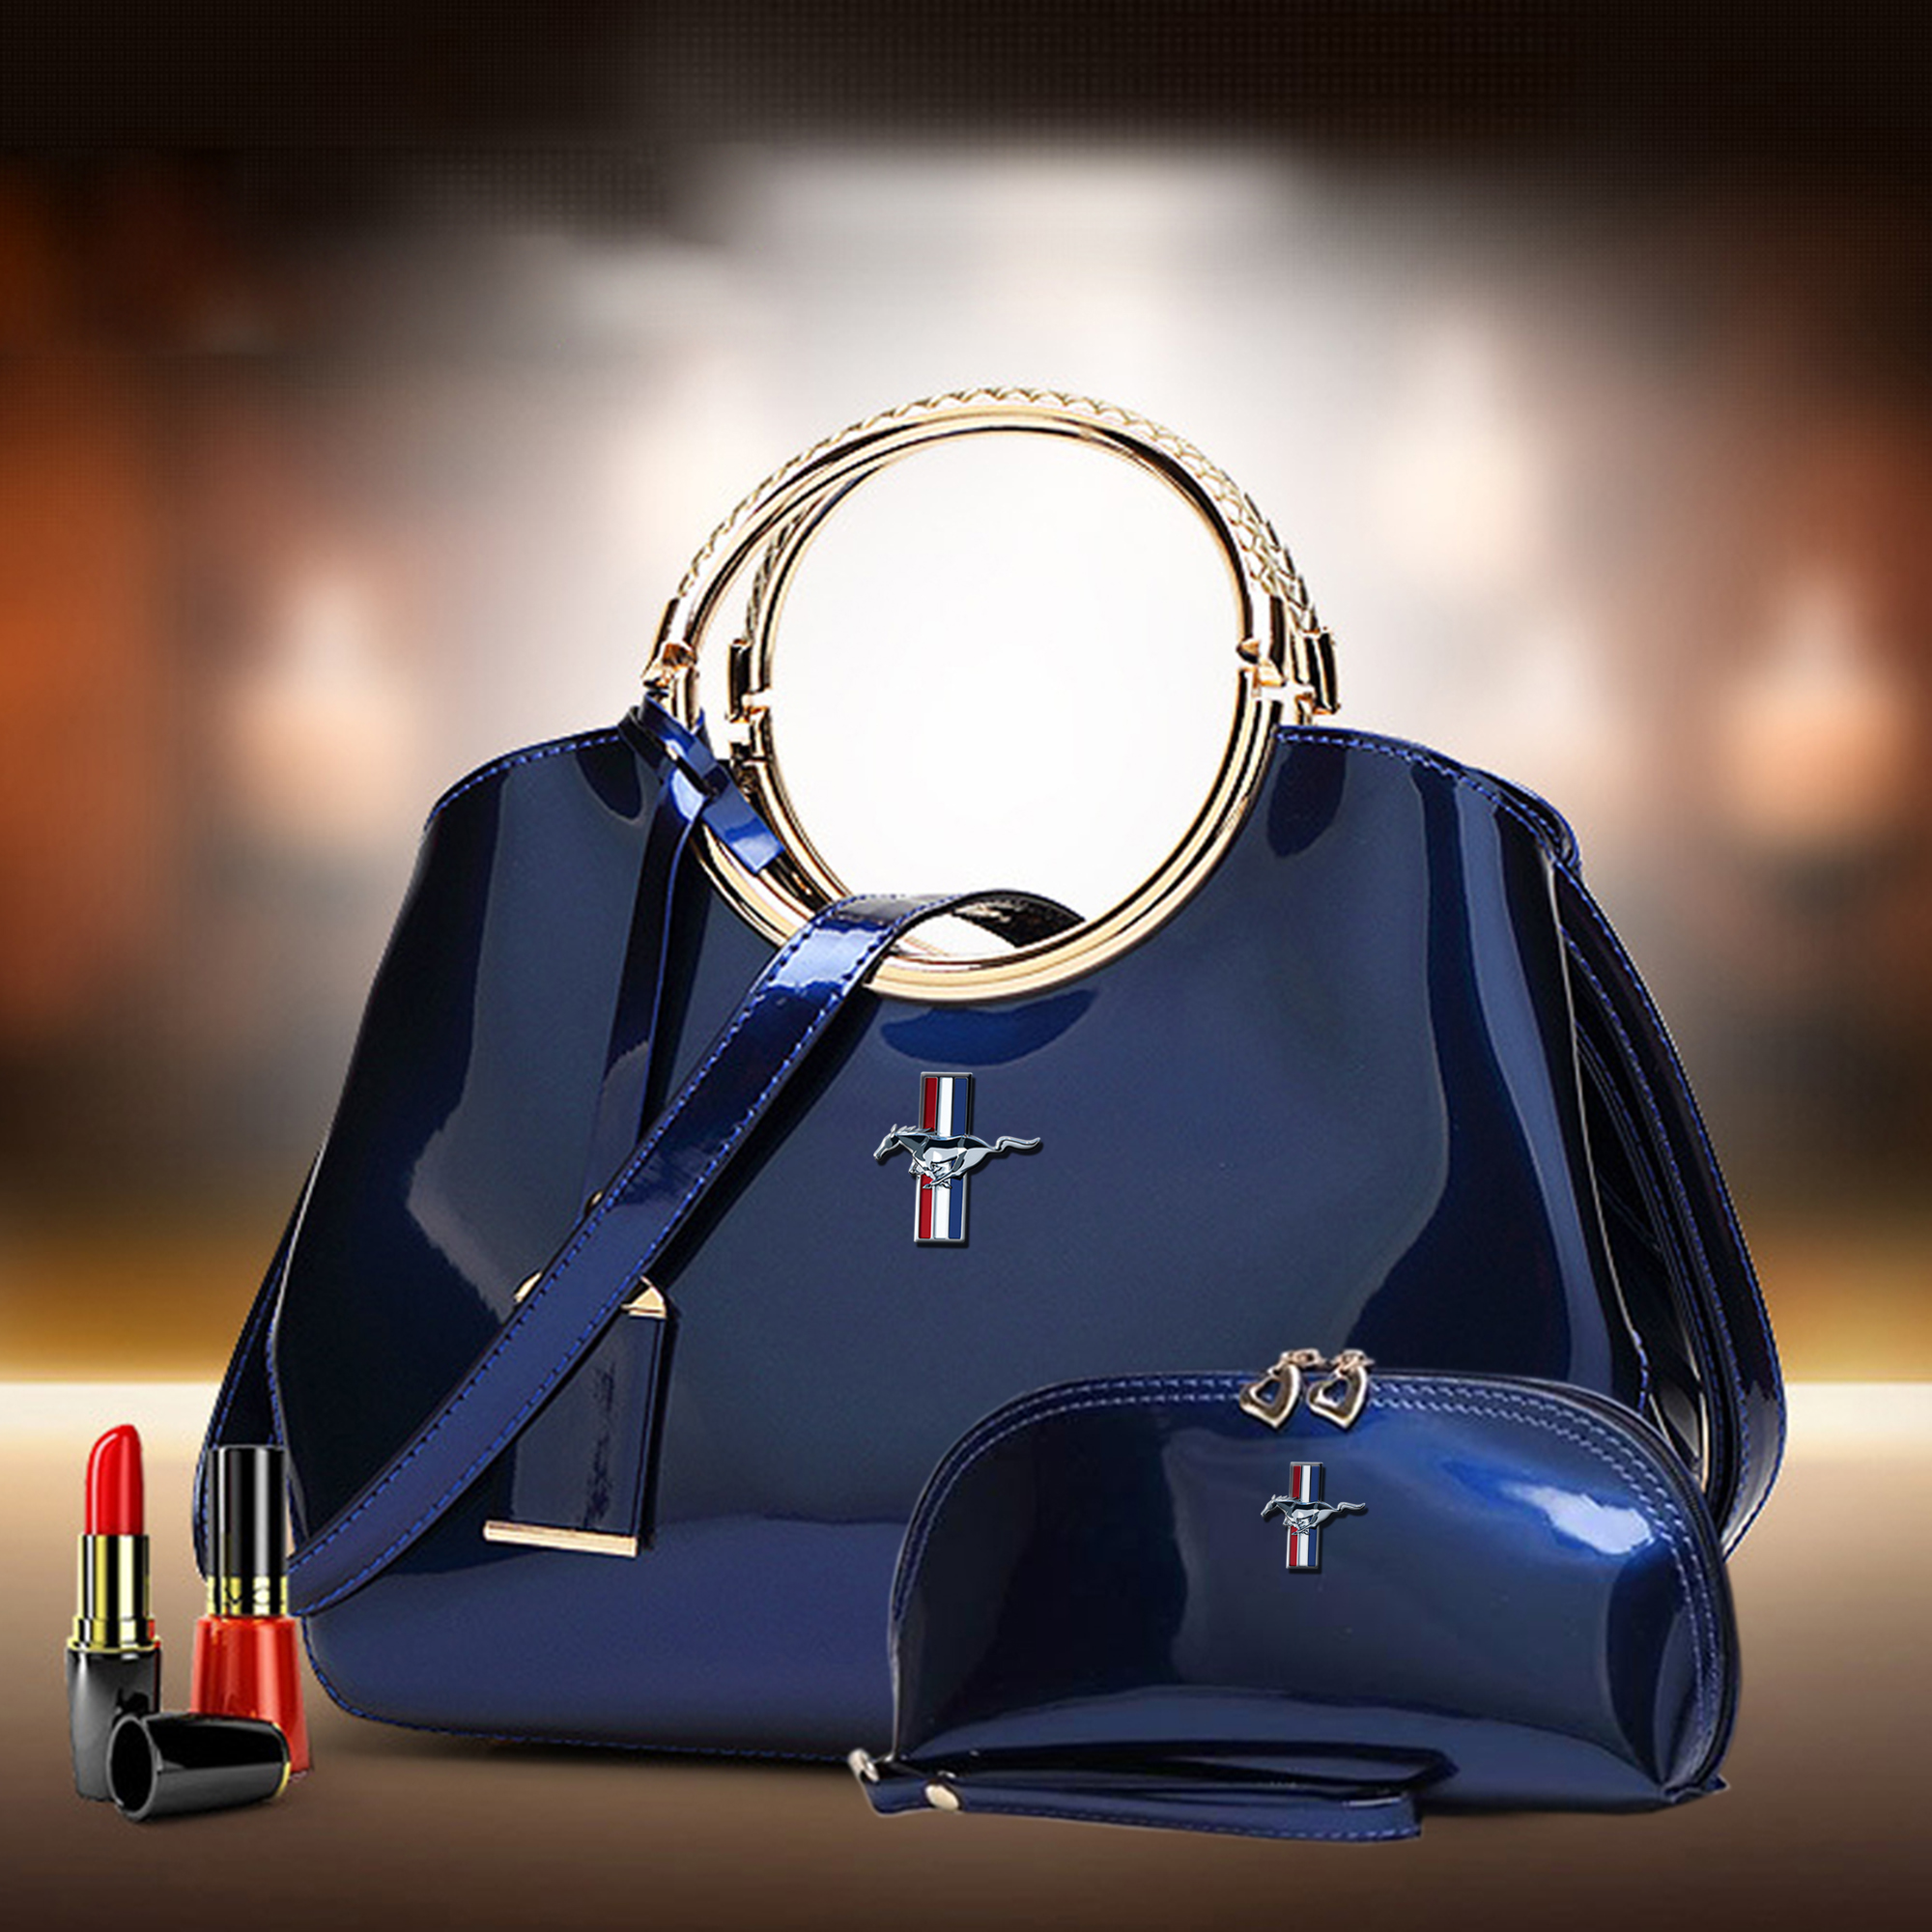 Mustang Elegant Matching - Tana Luxury Free Purses Wallets With